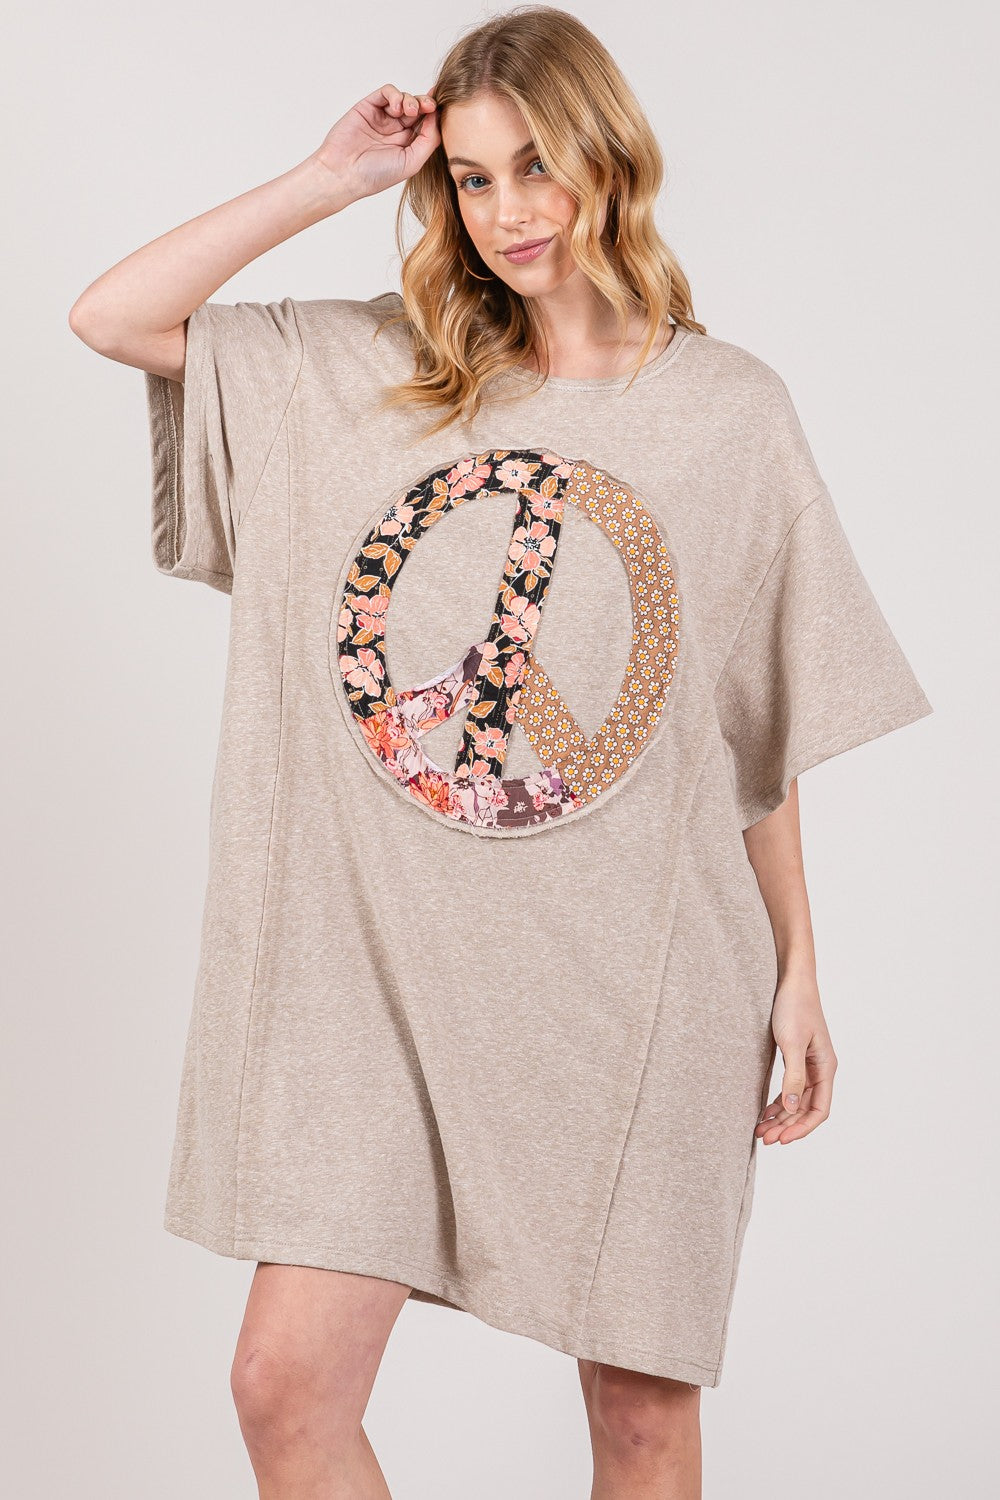 Full Size Peace Sign Applique Short Sleeve Tee Dress